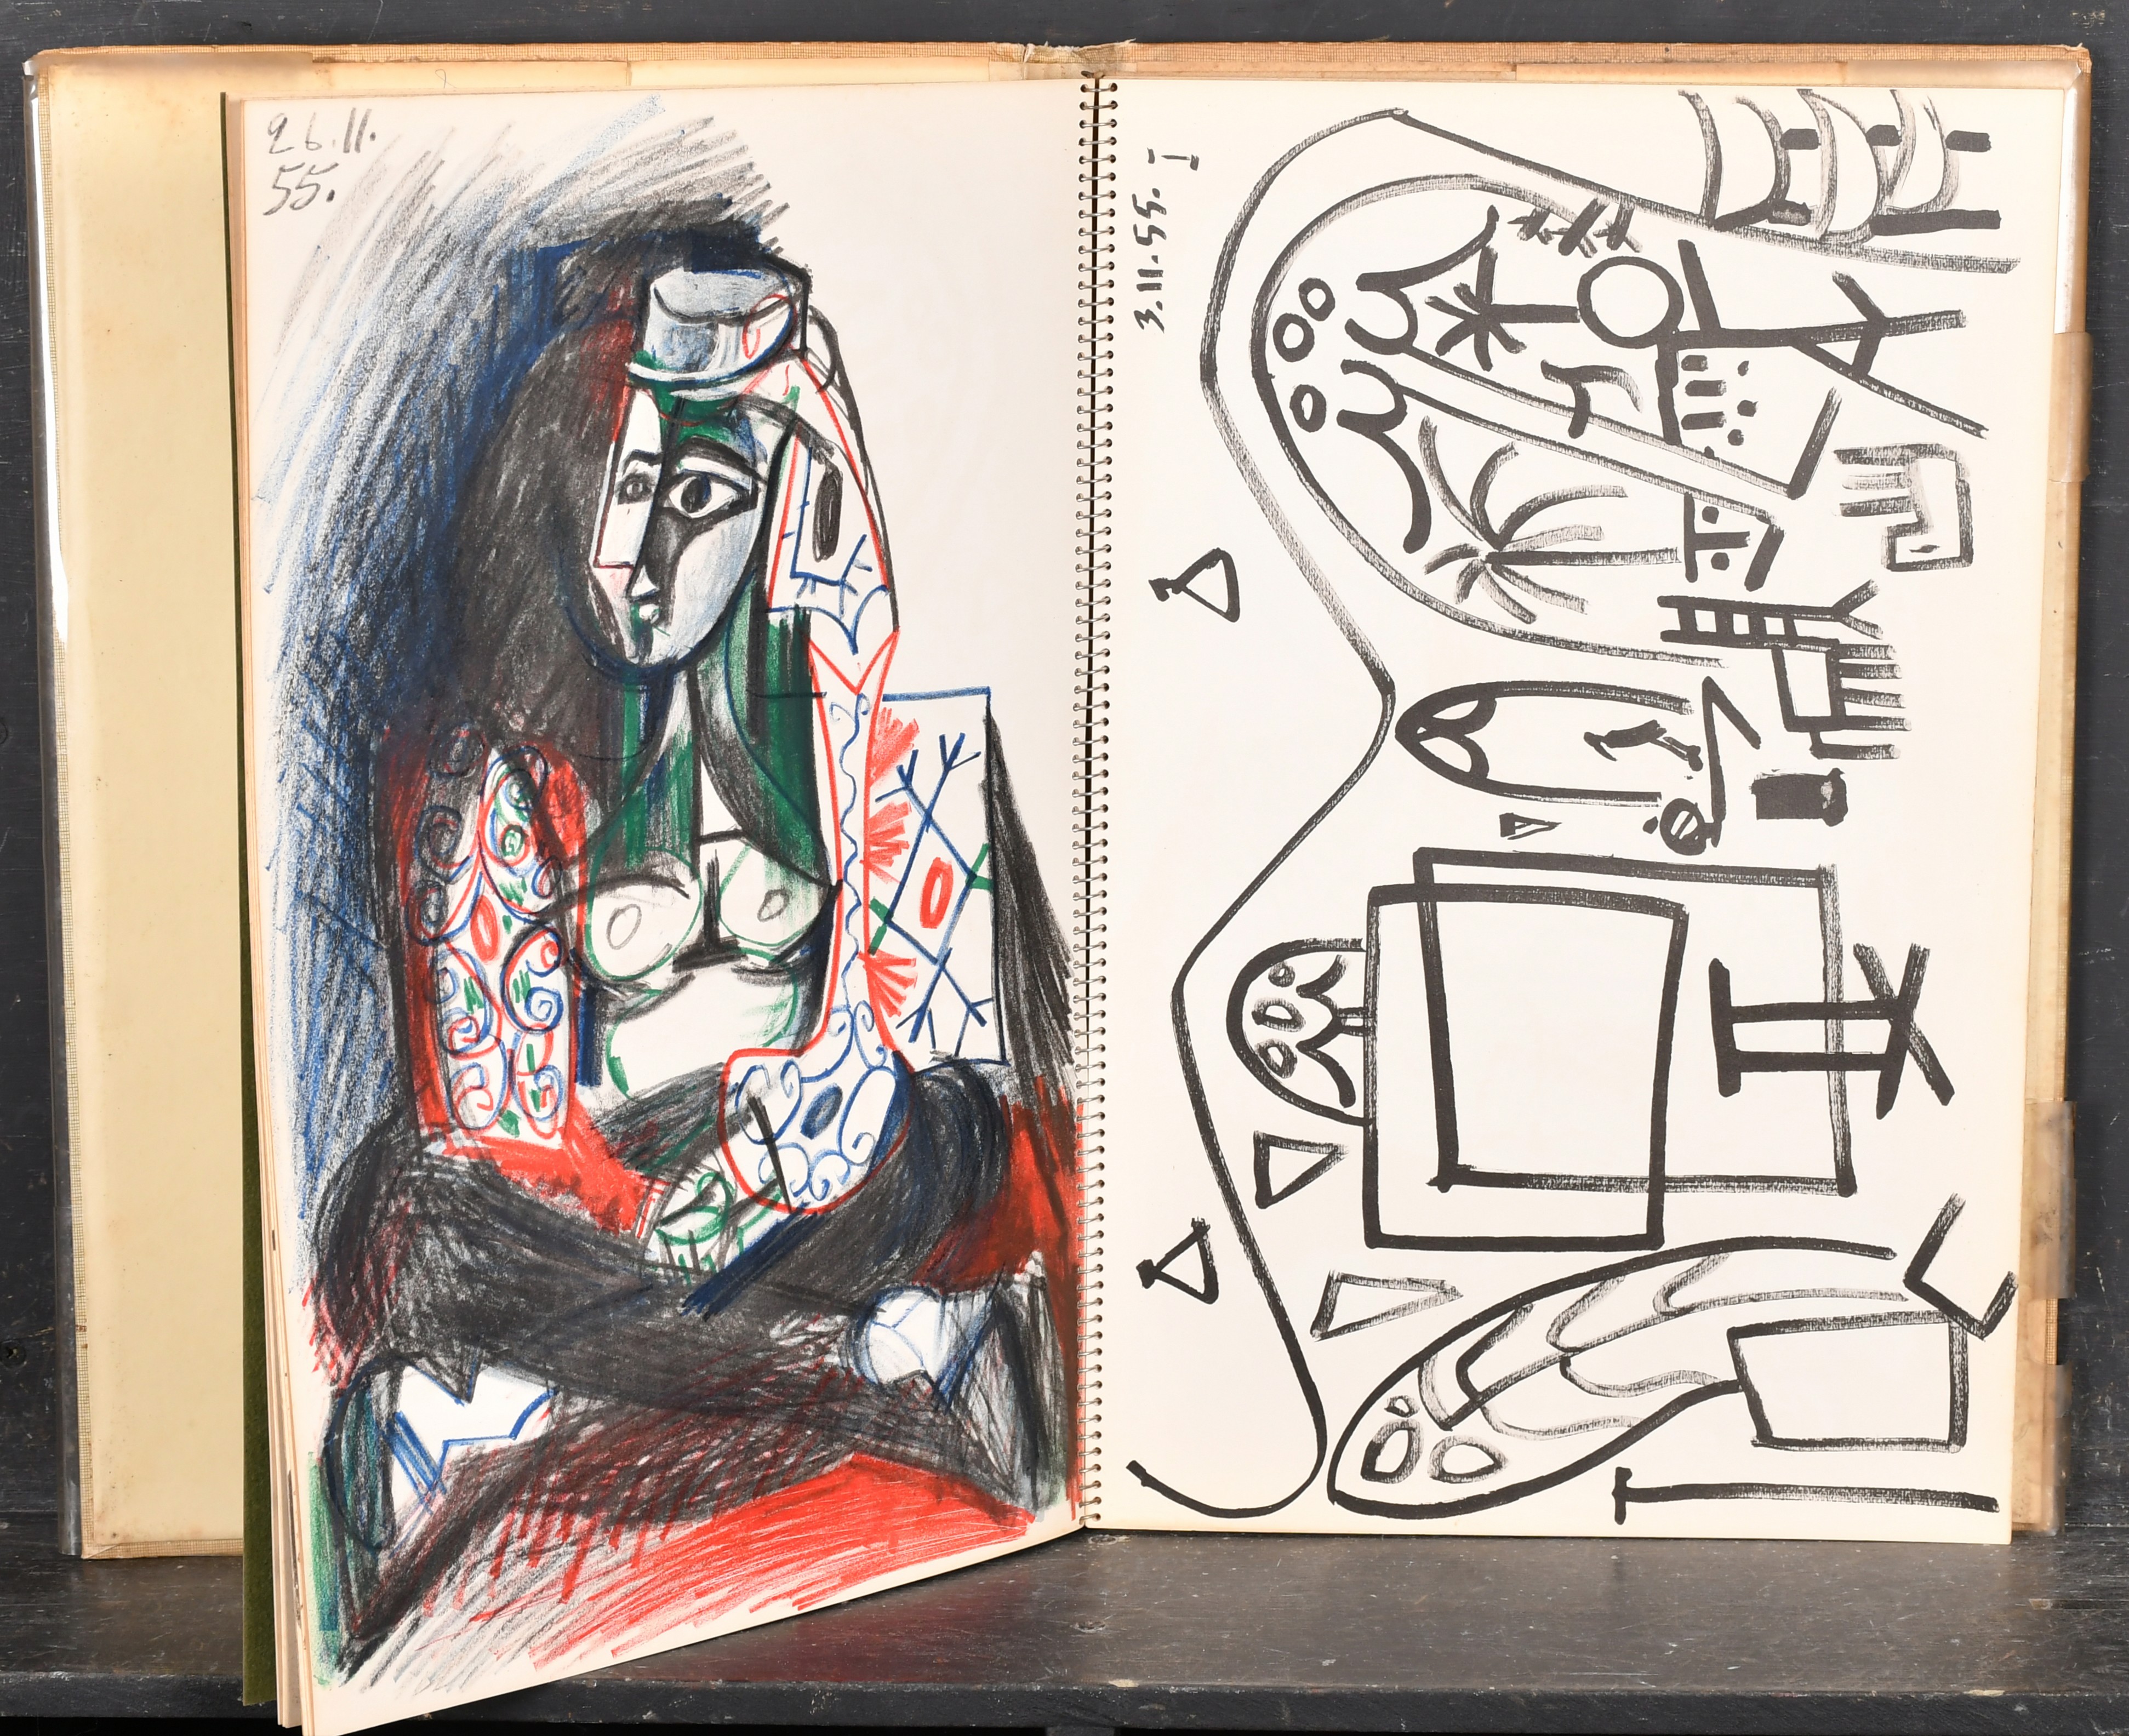 Pablo Picasso (1881-1973) Spanish. 'Picasso's Sketchbook', Limited Edition in facsimile, published - Image 4 of 4